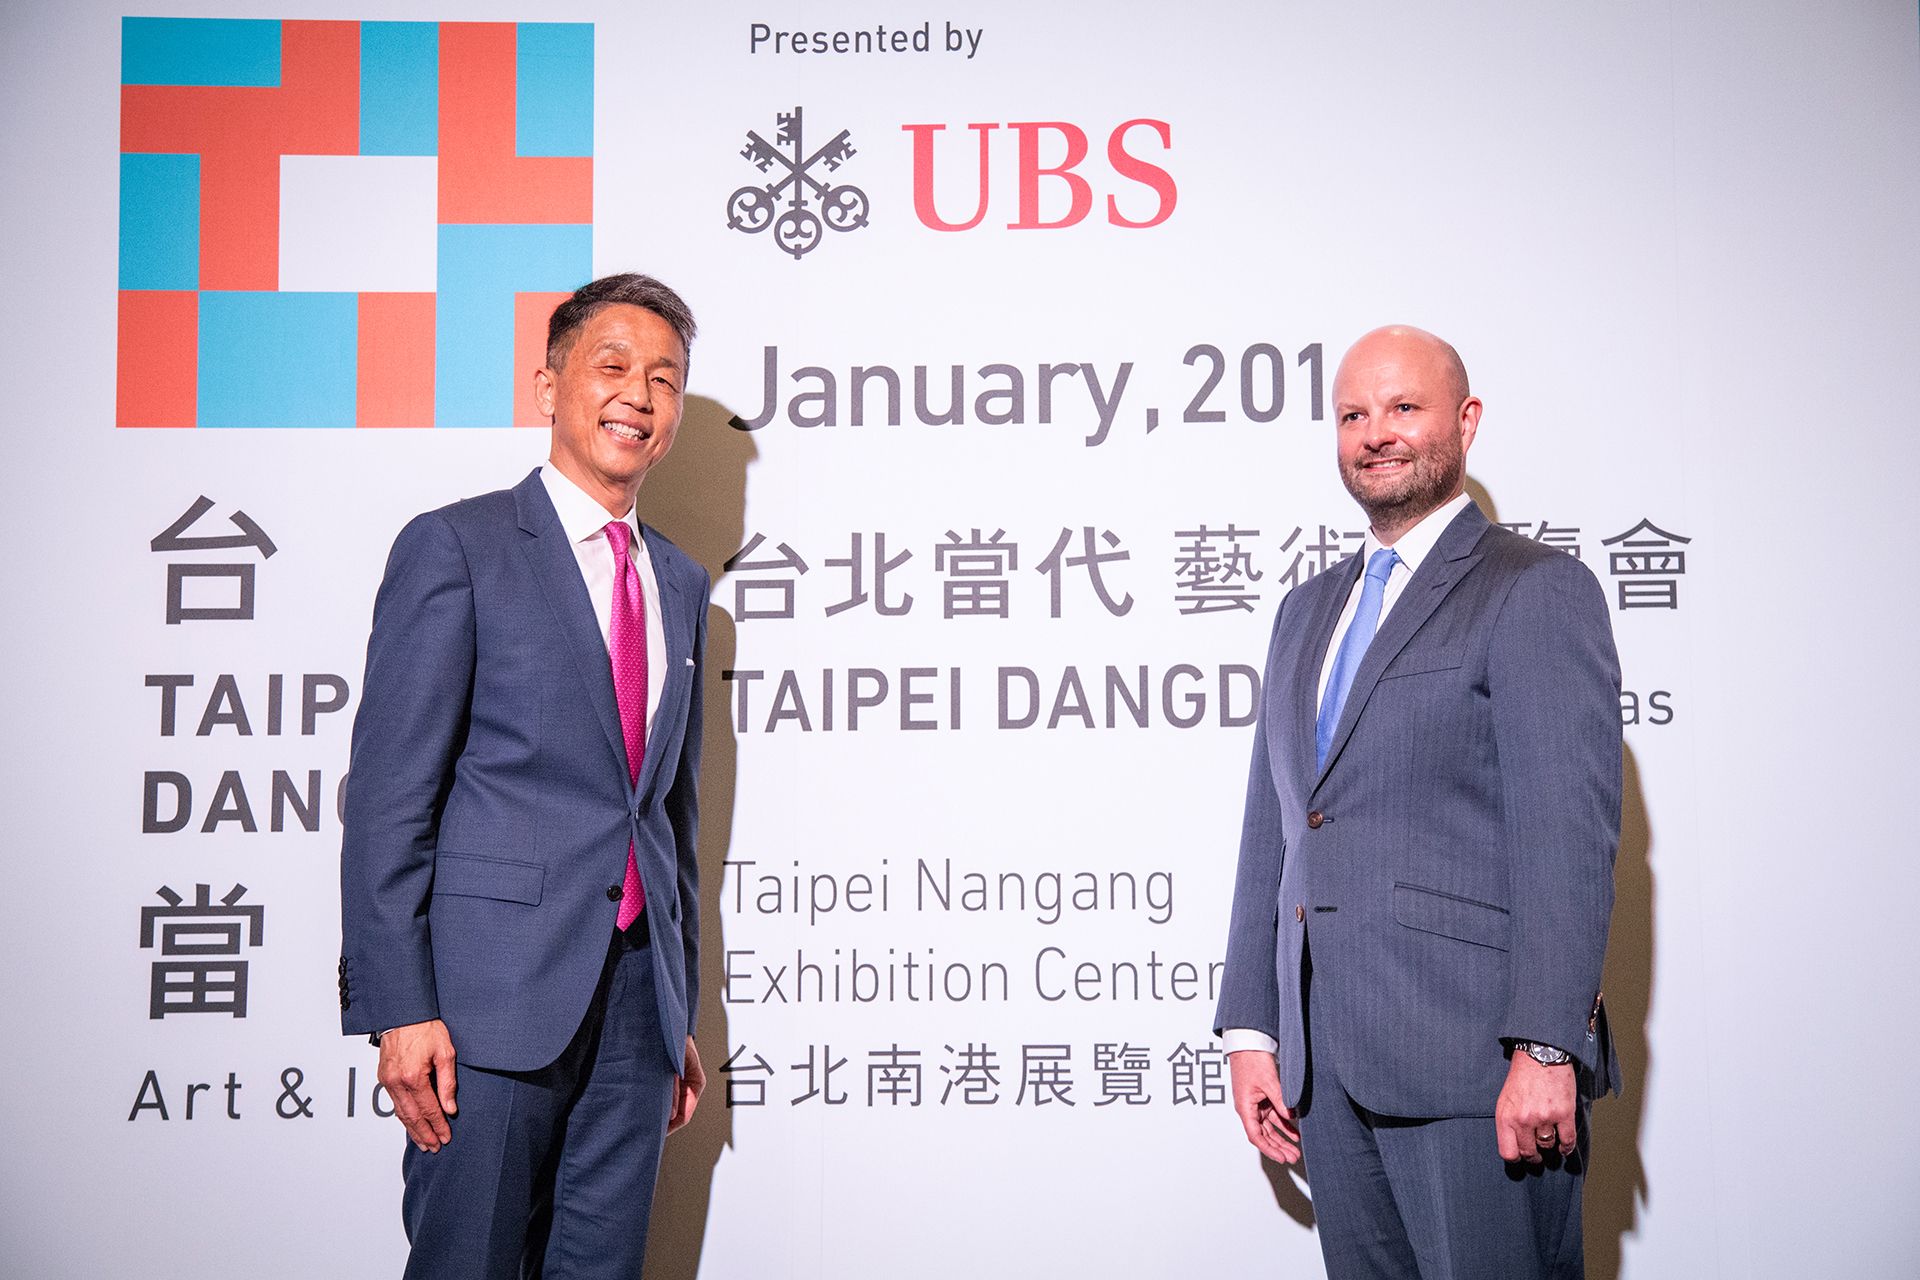 Dennis Chen, the head of UBS Taiwan, and Magnus Renfrew, the co-founder and director of Taipei Dangdai Courtesy of Taipei Dangdai